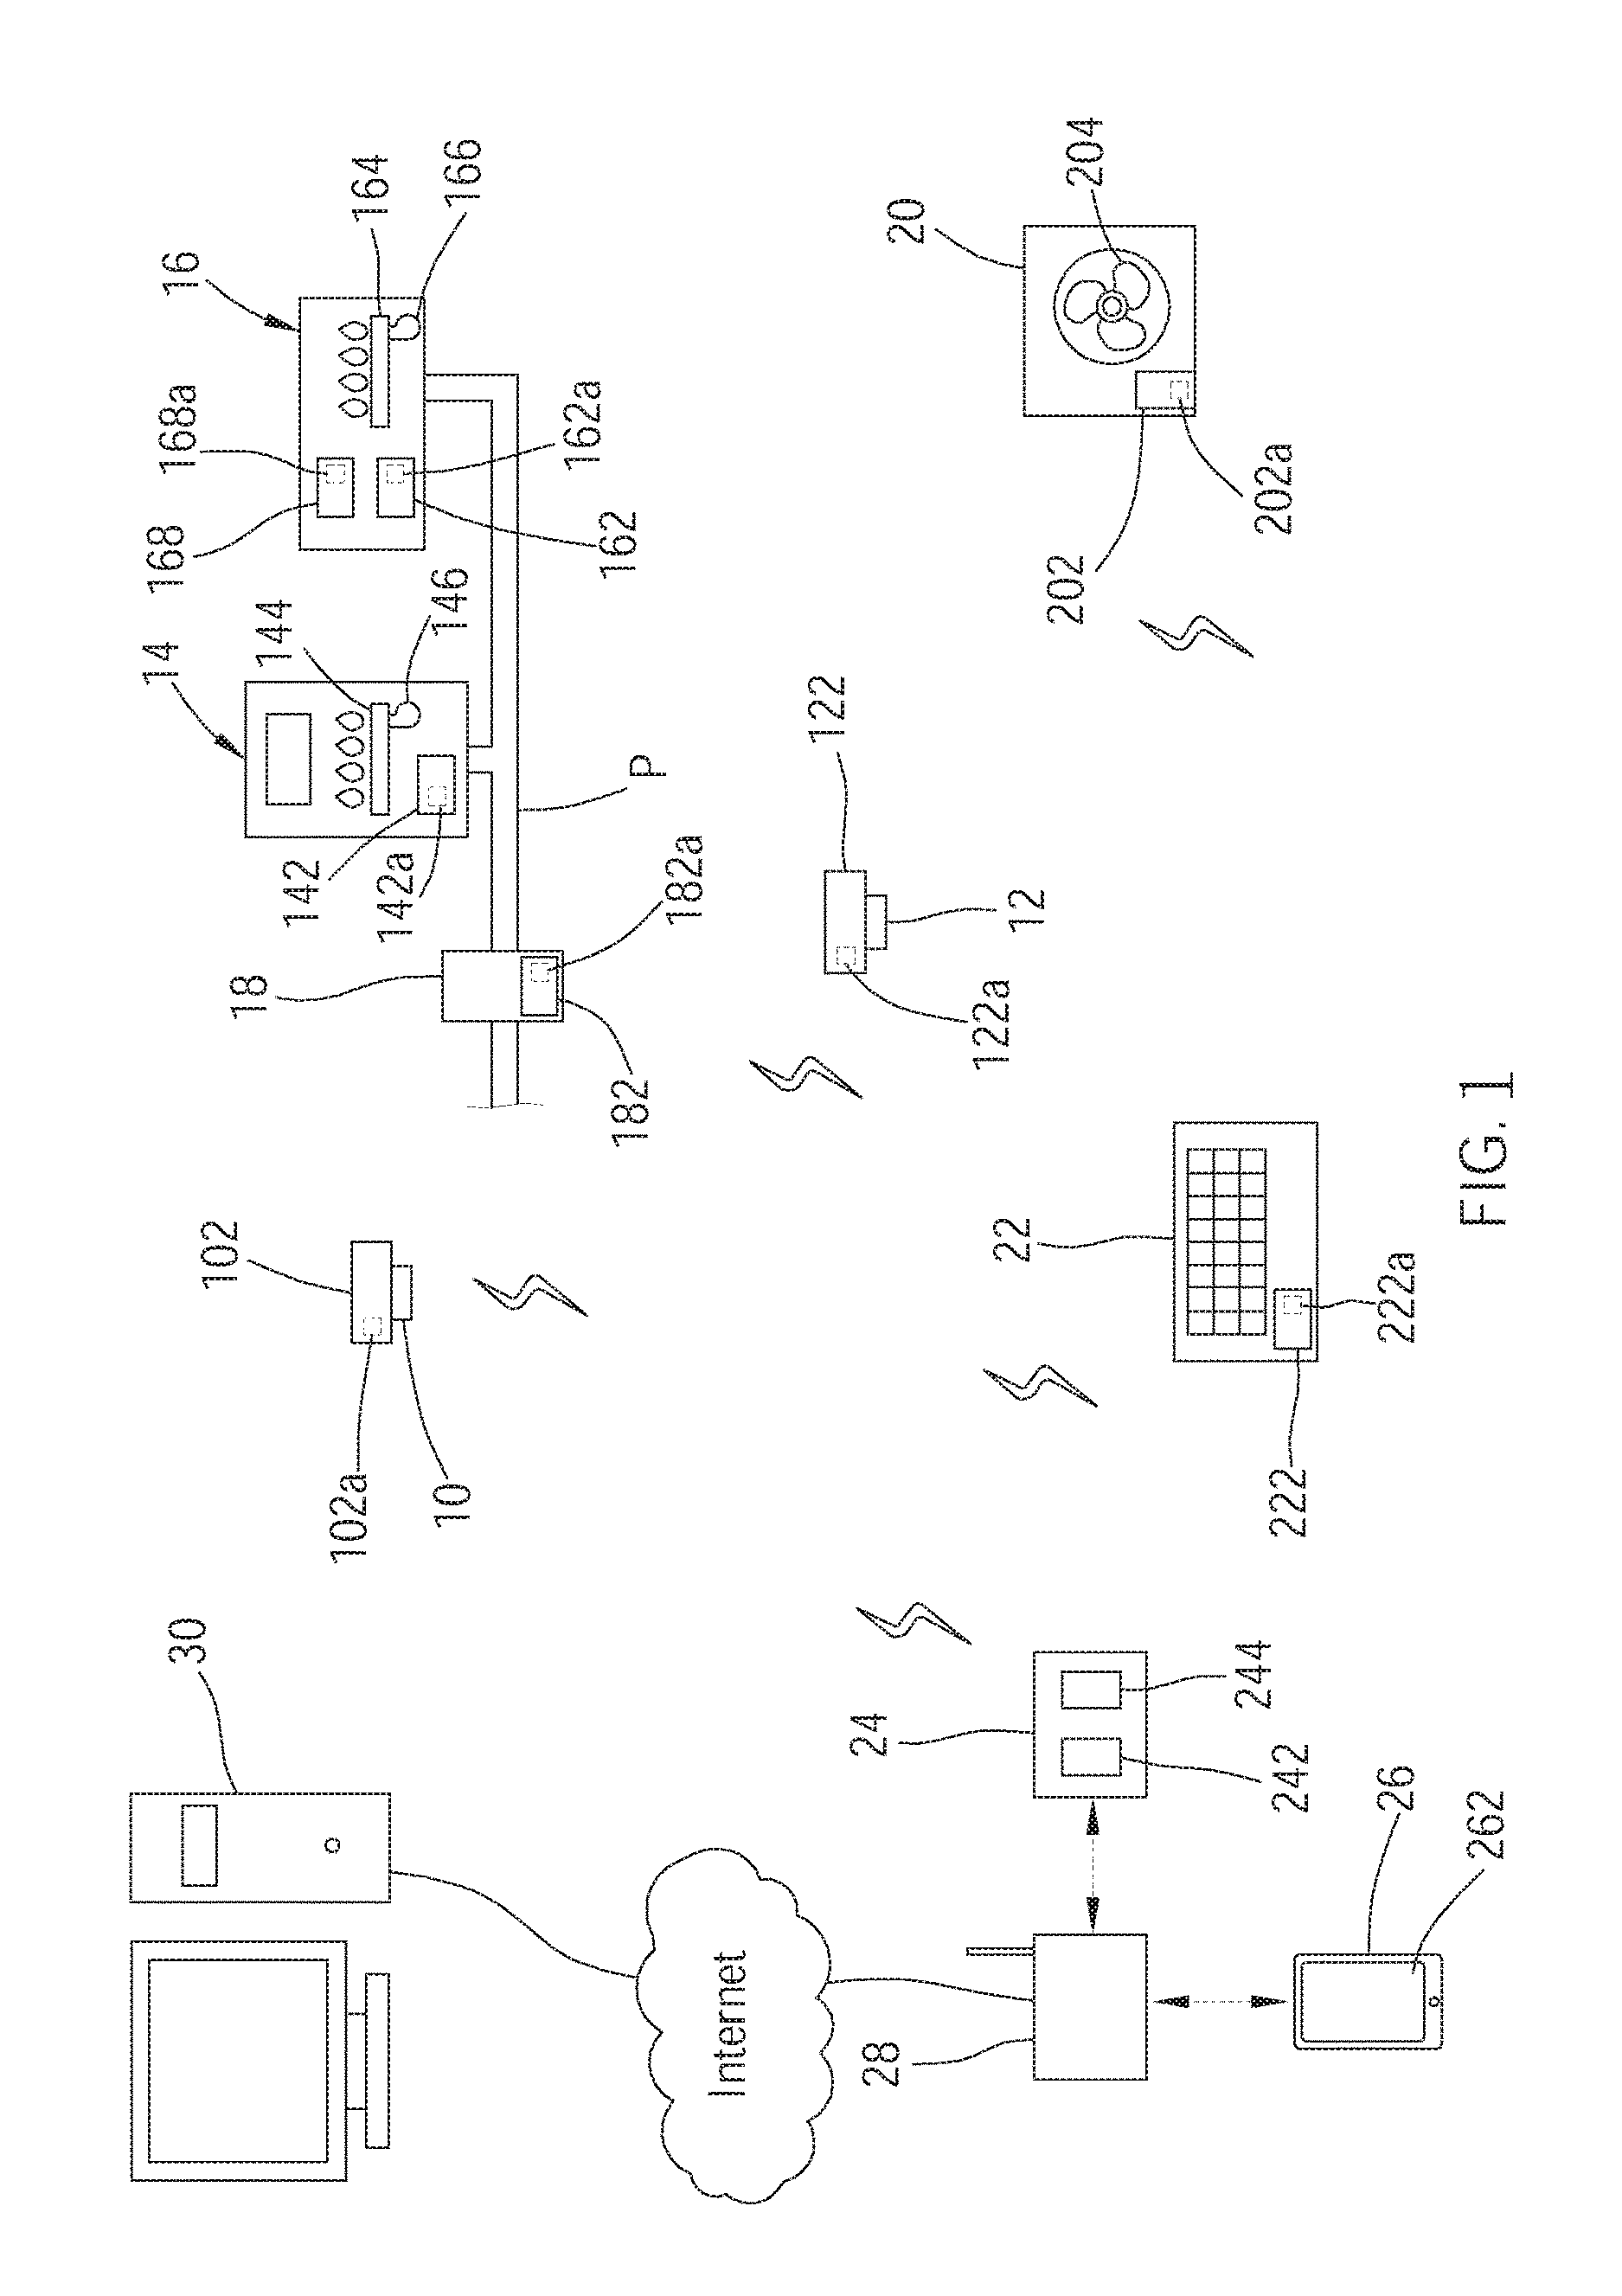 Method of controlling a remote controlled system